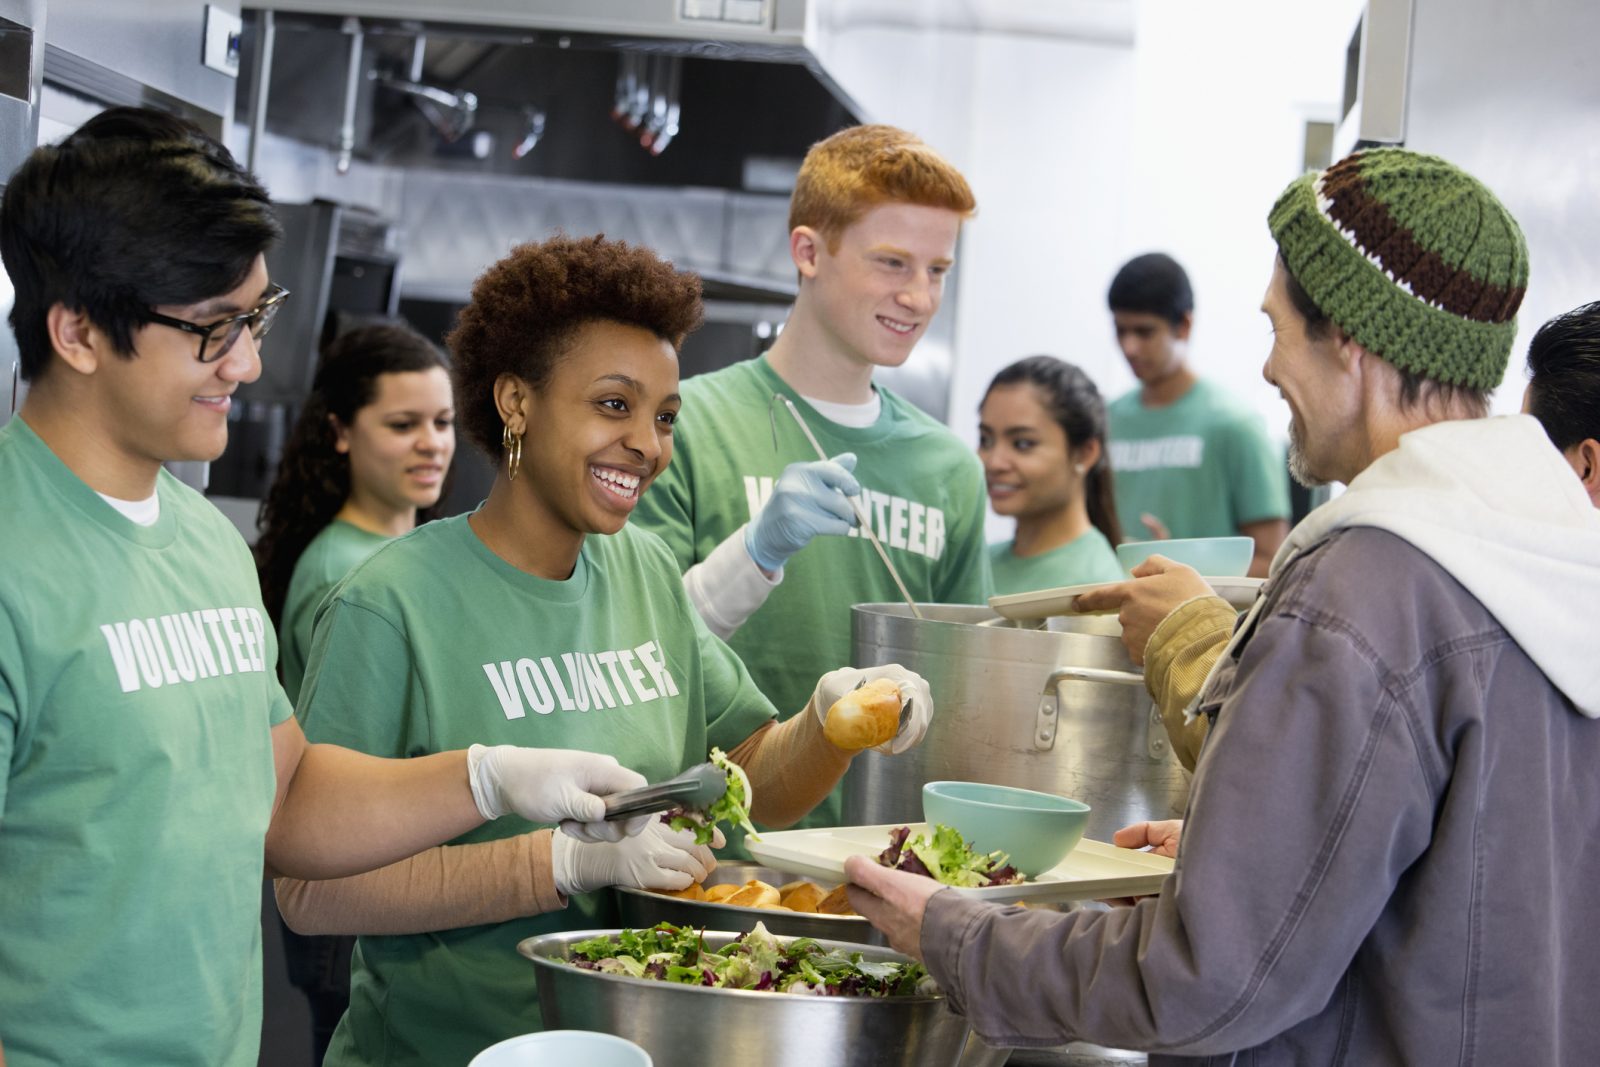 What Job Should I Have Volunteers working in soup kitchen